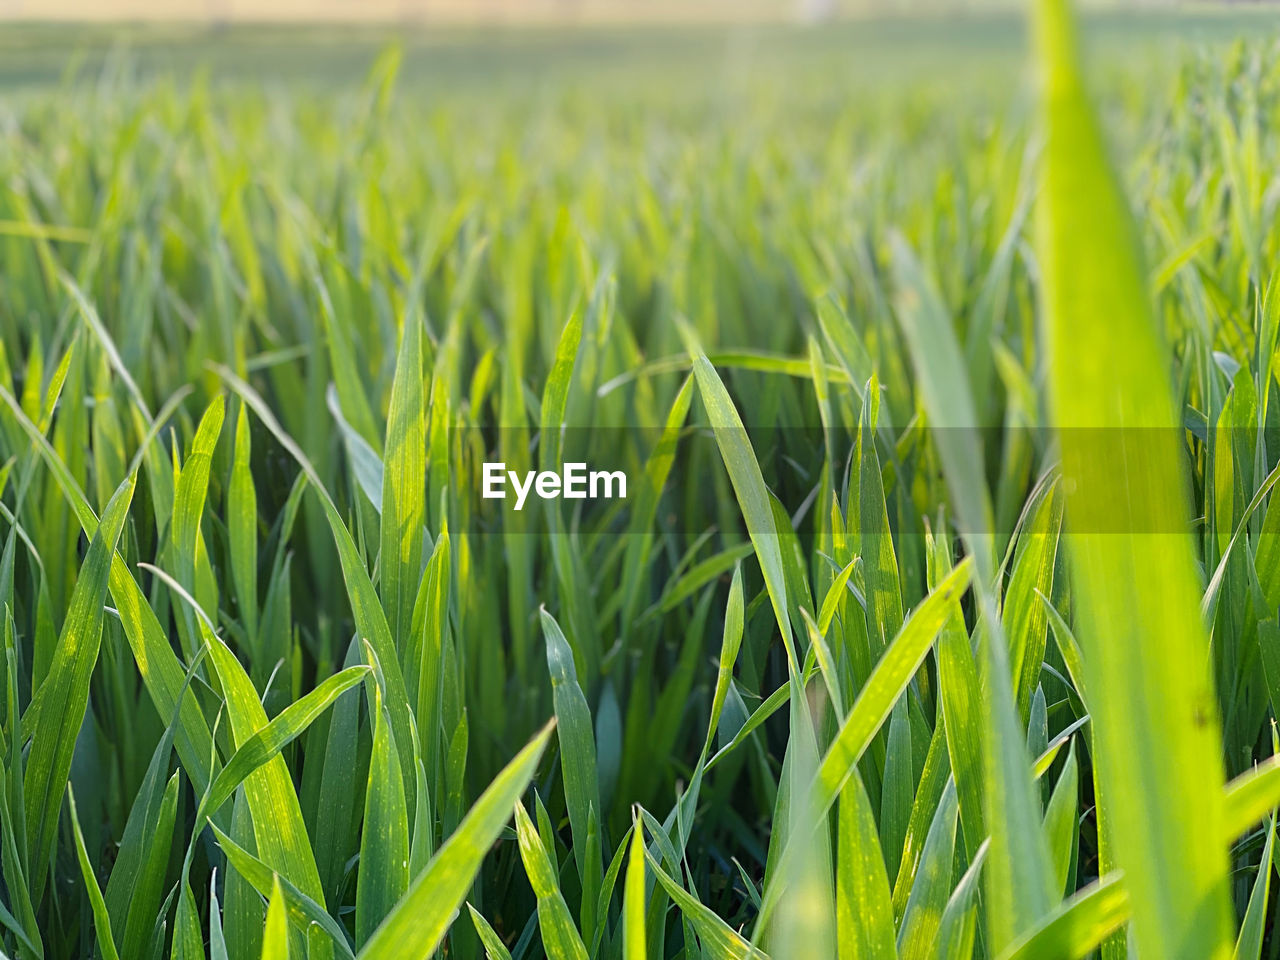 green, plant, agriculture, field, landscape, growth, rural scene, crop, land, cereal plant, farm, nature, paddy field, grass, environment, beauty in nature, no people, lawn, grassland, food, food and drink, day, outdoors, freshness, corn, meadow, tranquility, prairie, barley, wheatgrass, sky, focus on foreground, close-up, backgrounds